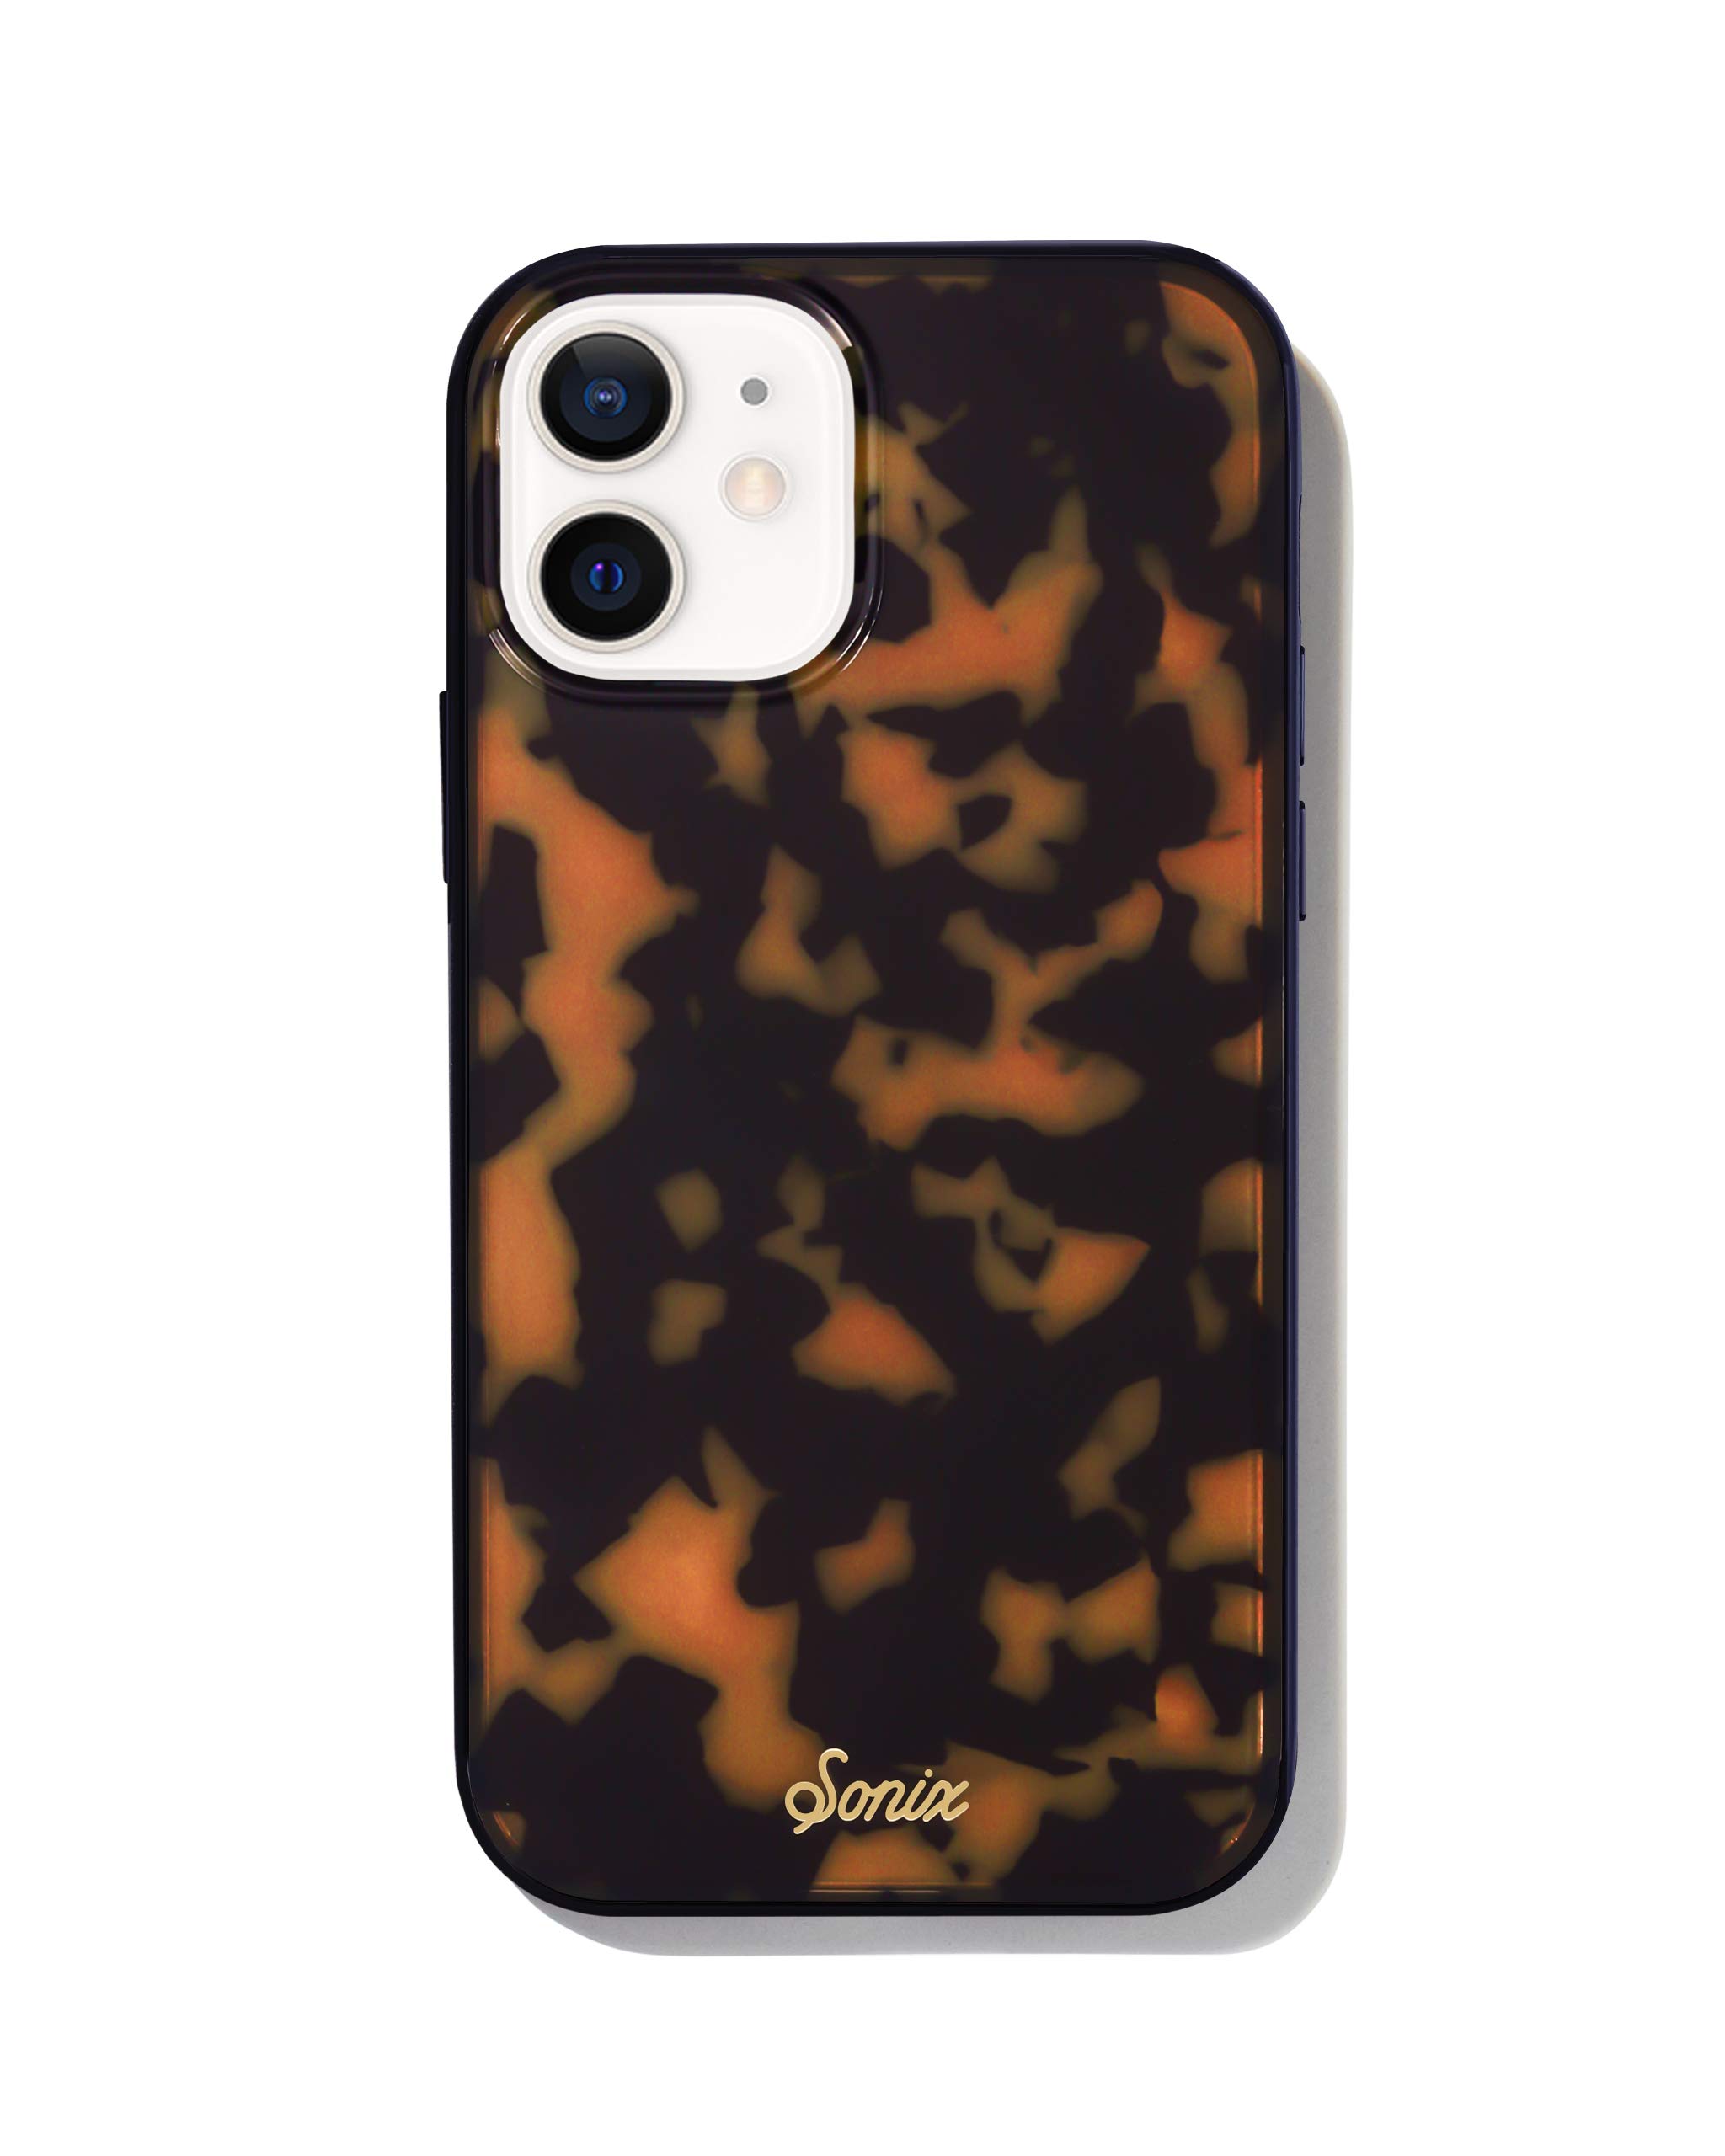 Sonix Brown Tort Case for iPhone 12 / 12Pro [10ft Drop Tested] Women's Protective Tortoiseshell Leopard Cover for Apple iPhone 12, iPhone 12 Pro